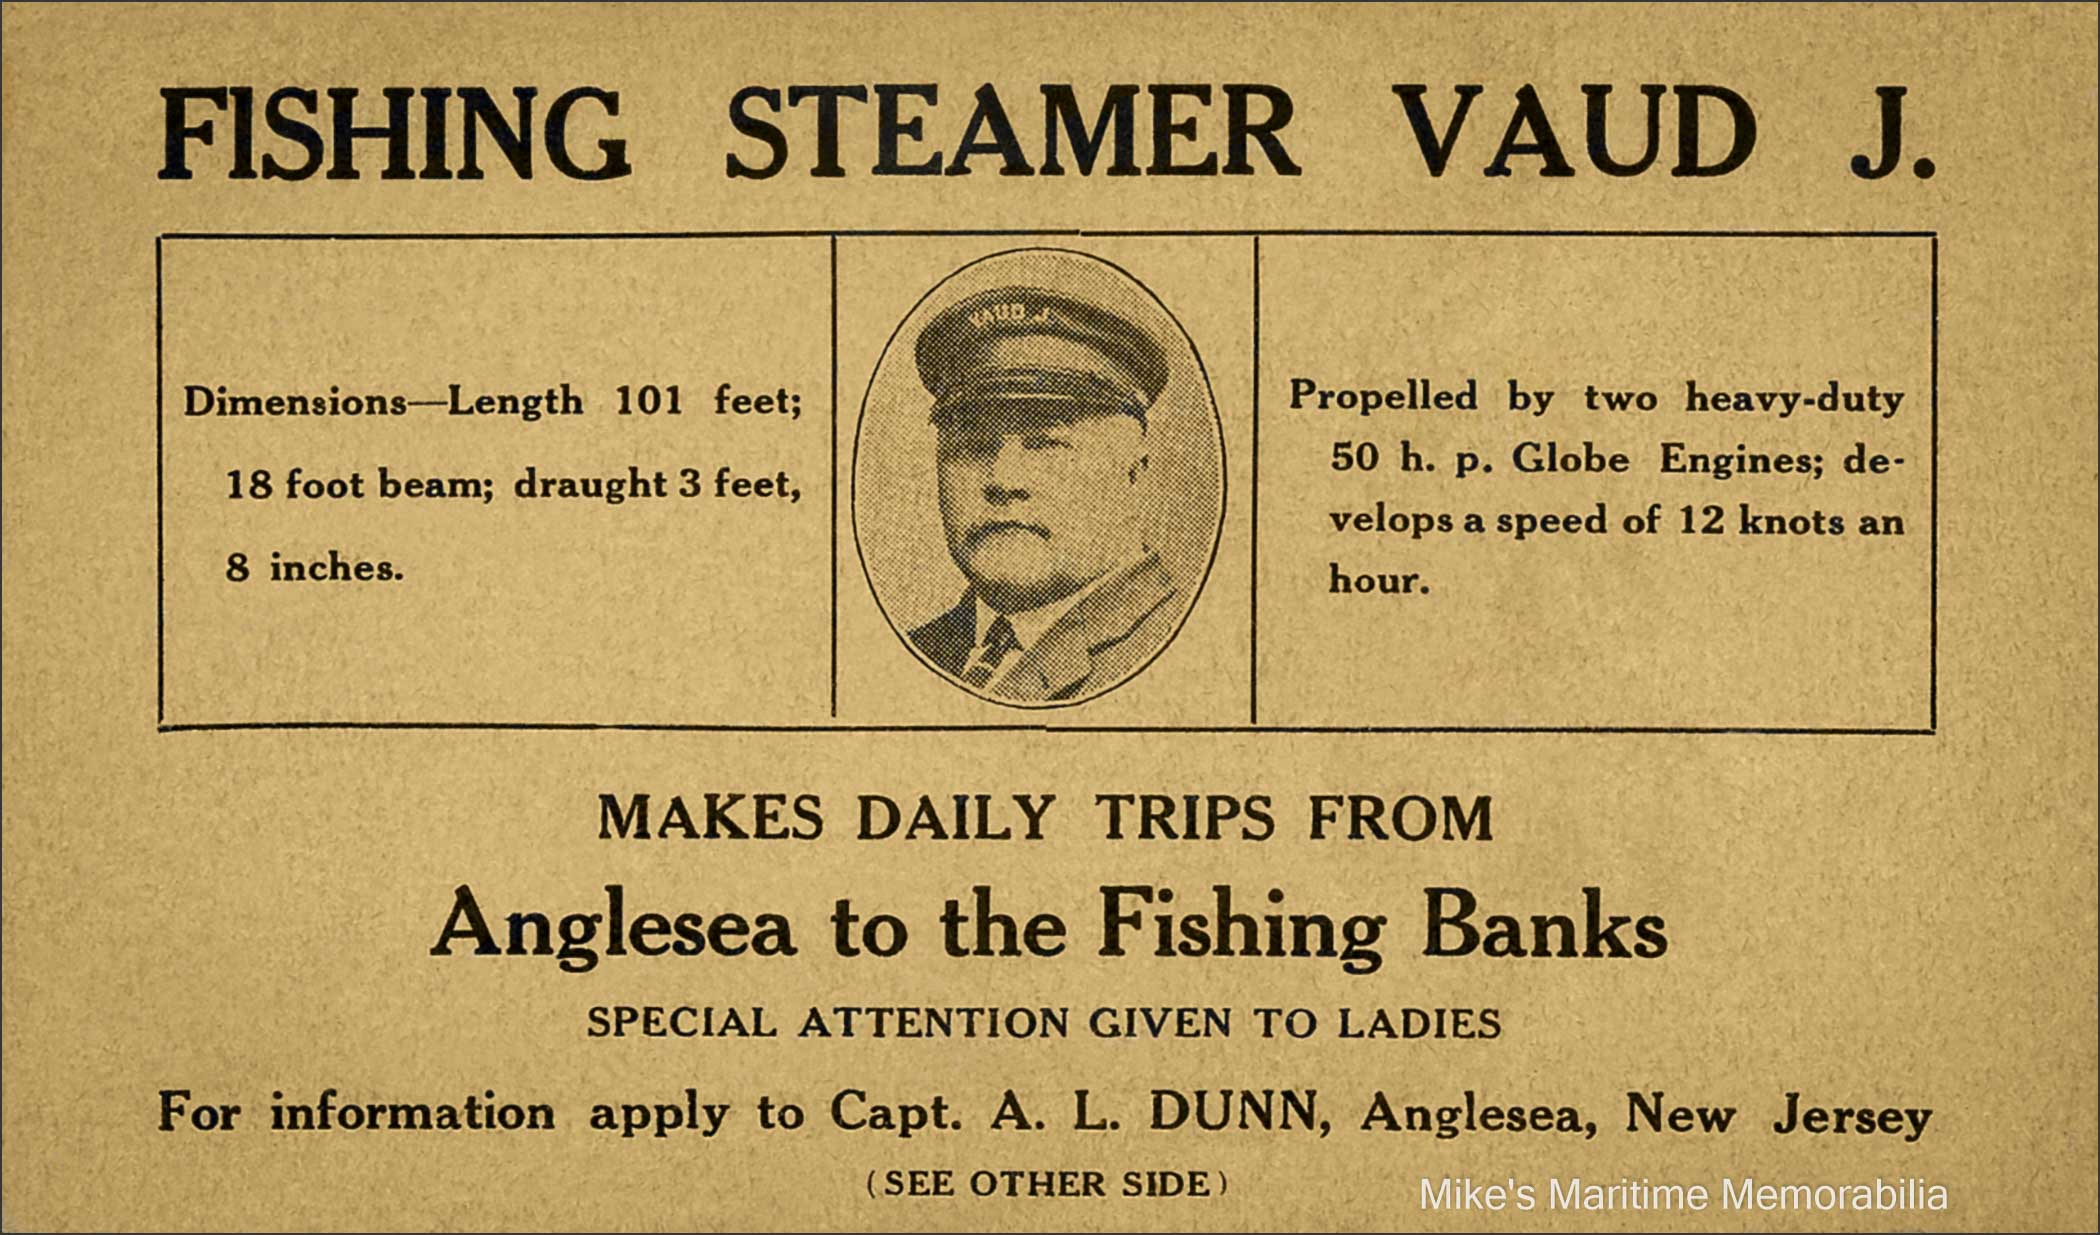 VAUD J Advertising Card, Anglesea, NJ – 1923 An advertising card for the fishing steamer "VAUD J" from Angelsea, NJ circa 1923. Cards like this were often given out at local shops and train stations in the greater Philadelphia, PA area. Cape May, NJ and Angelsea, NJ were the closest ports to Philadelphia that offered deep sea fishing trips. (In 1917, Anglesea became part of the City of North Wildwood, NJ.) The popular way to travel to these New Jersey ports was aboard special excursion trains from Philadelphia, PA that transported thousands of anglers daily. And there is little doubt that Captain Dunn gave special attention to ladies.